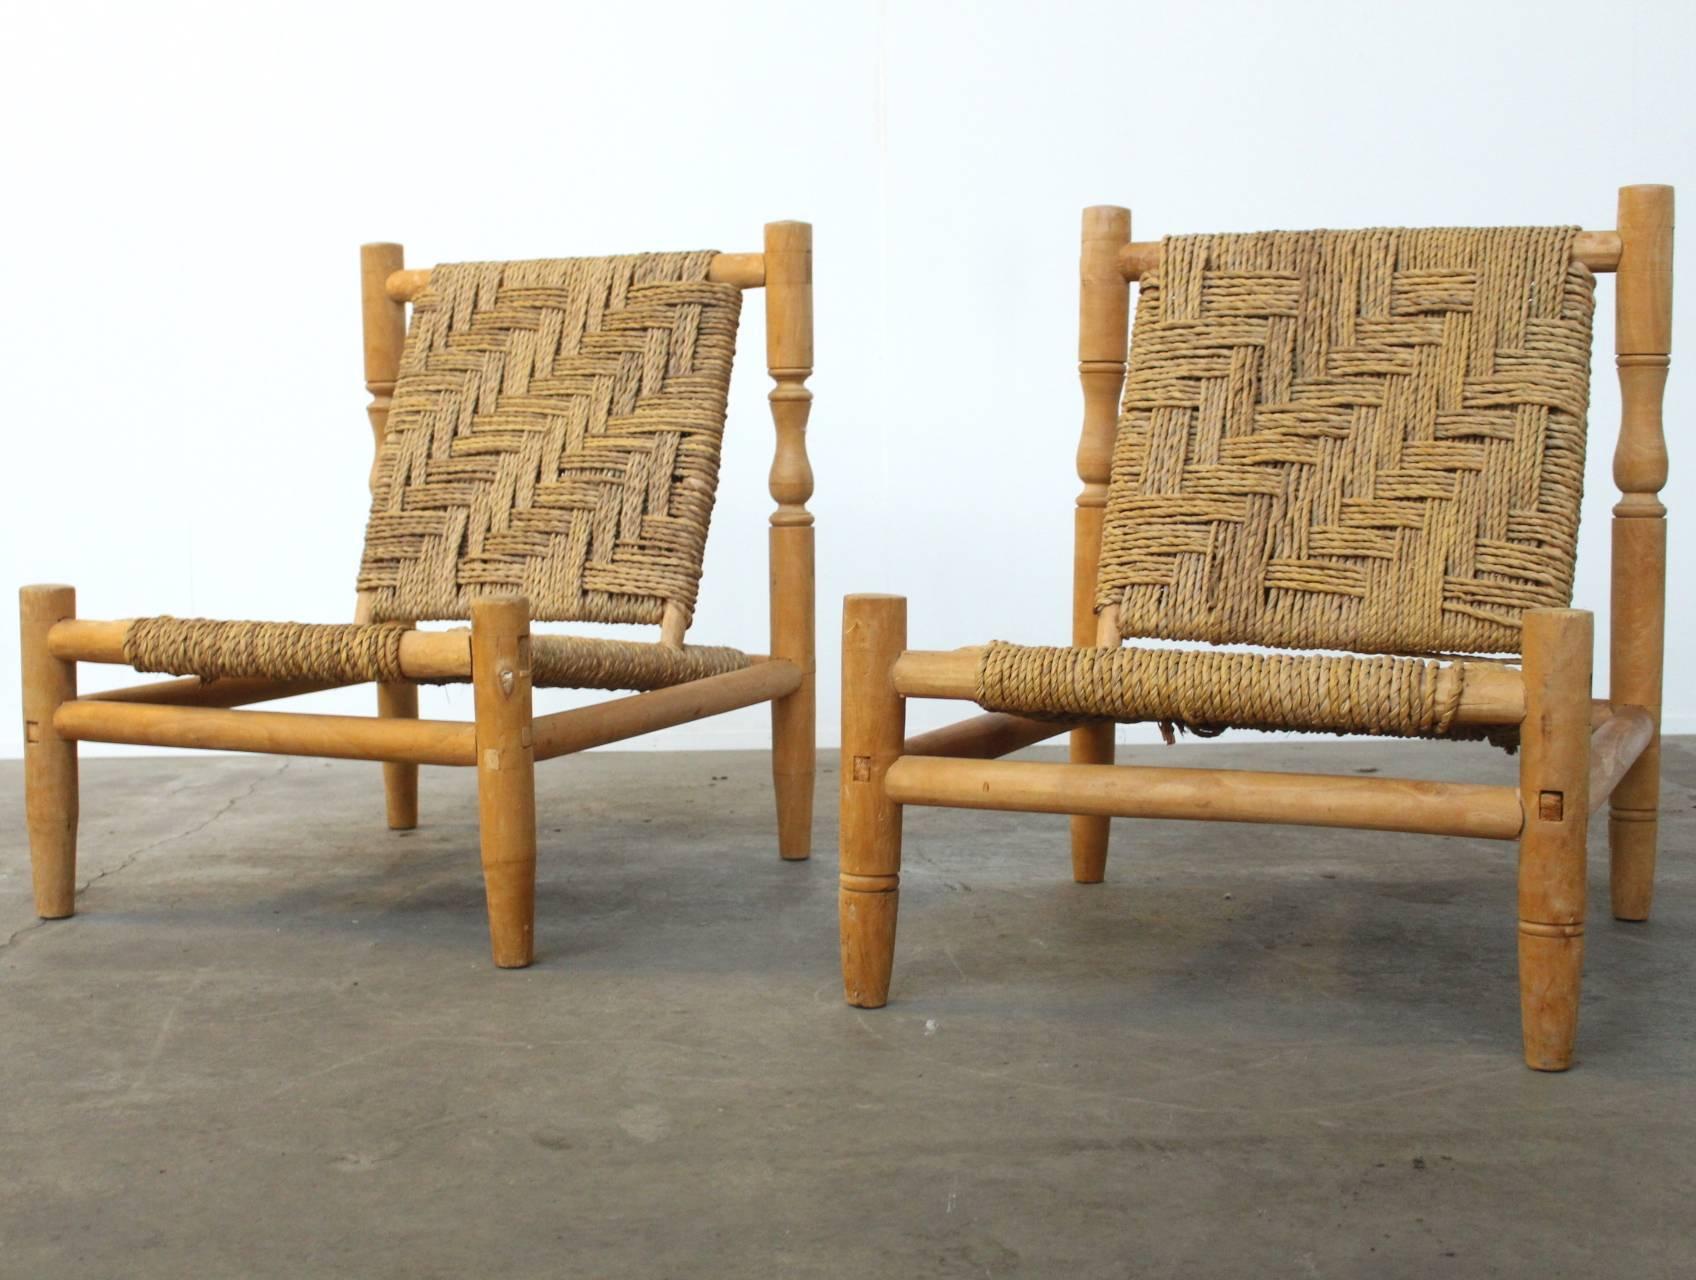 Beautiful pair of two French lounge chairs or easy chairs in the style of Charlotte Perriand. The frame of the chairs is made of ashwood and the seat and backrest are made of woven sisal. The chairs have a wonderfully crafted structure and are